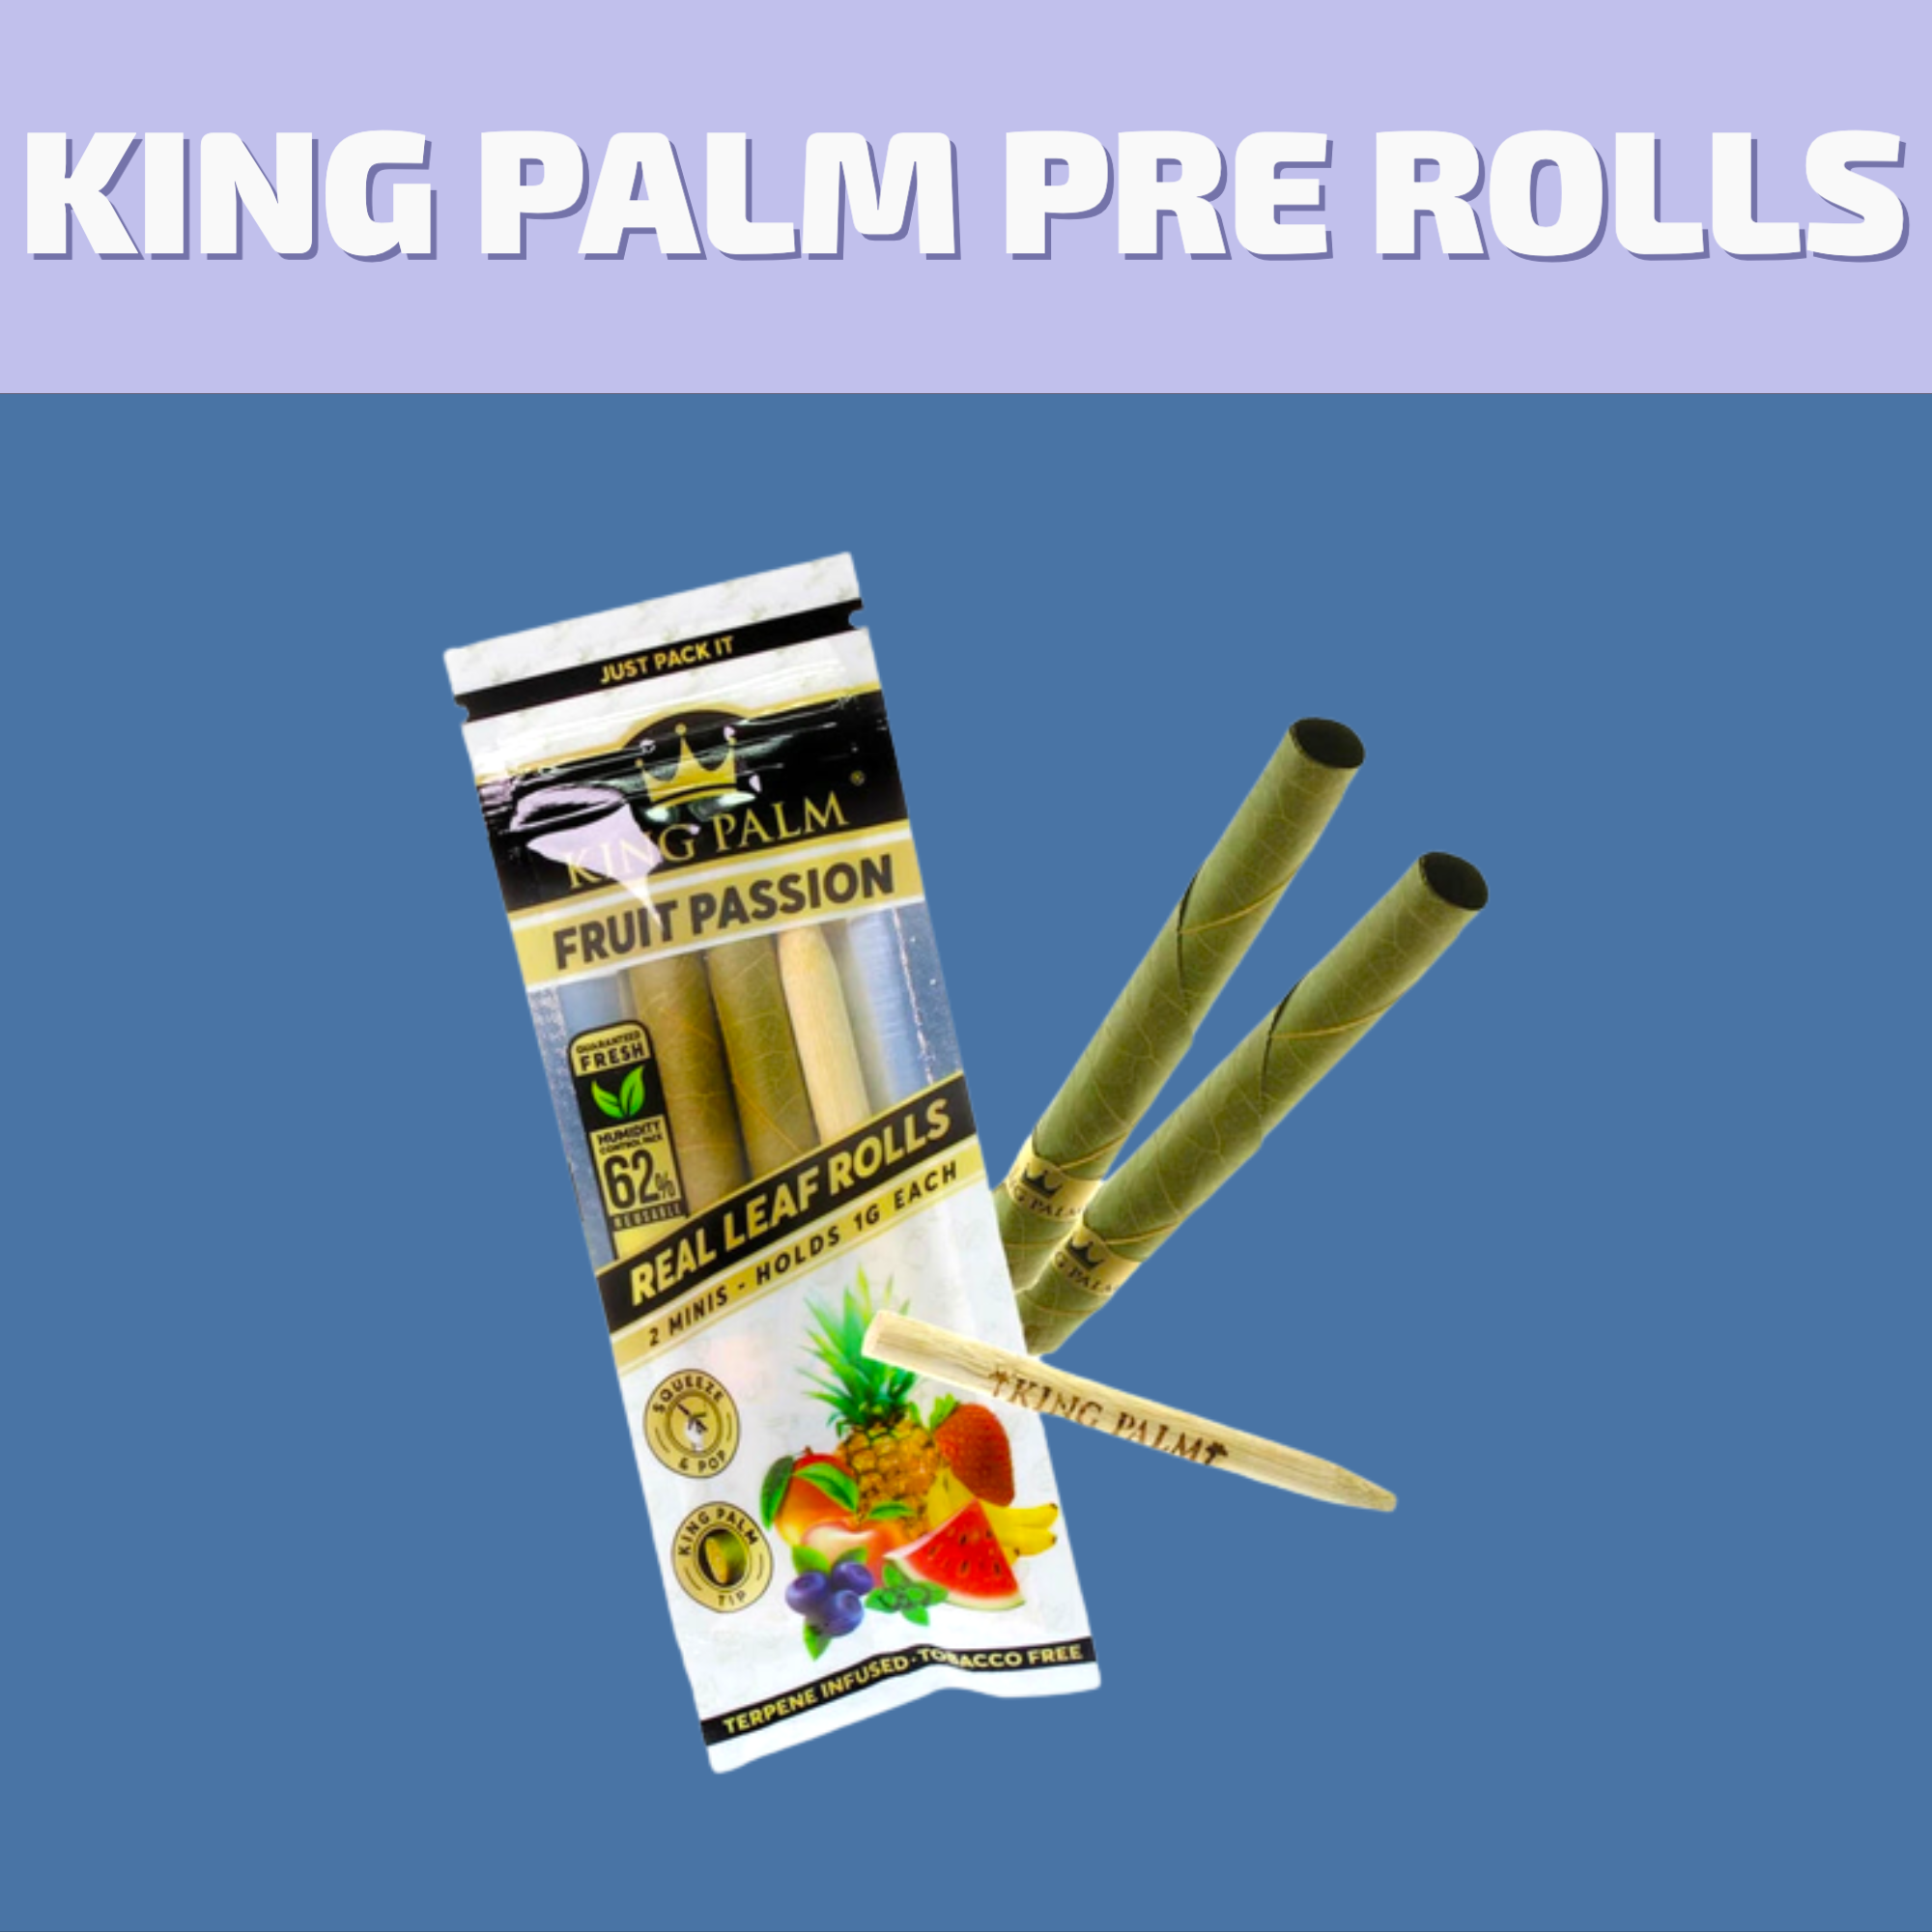 Shop our selection of King Palm Pre Rolls for same day delivery in Winnipeg or visit our cannabis store on 580 Academy Road.